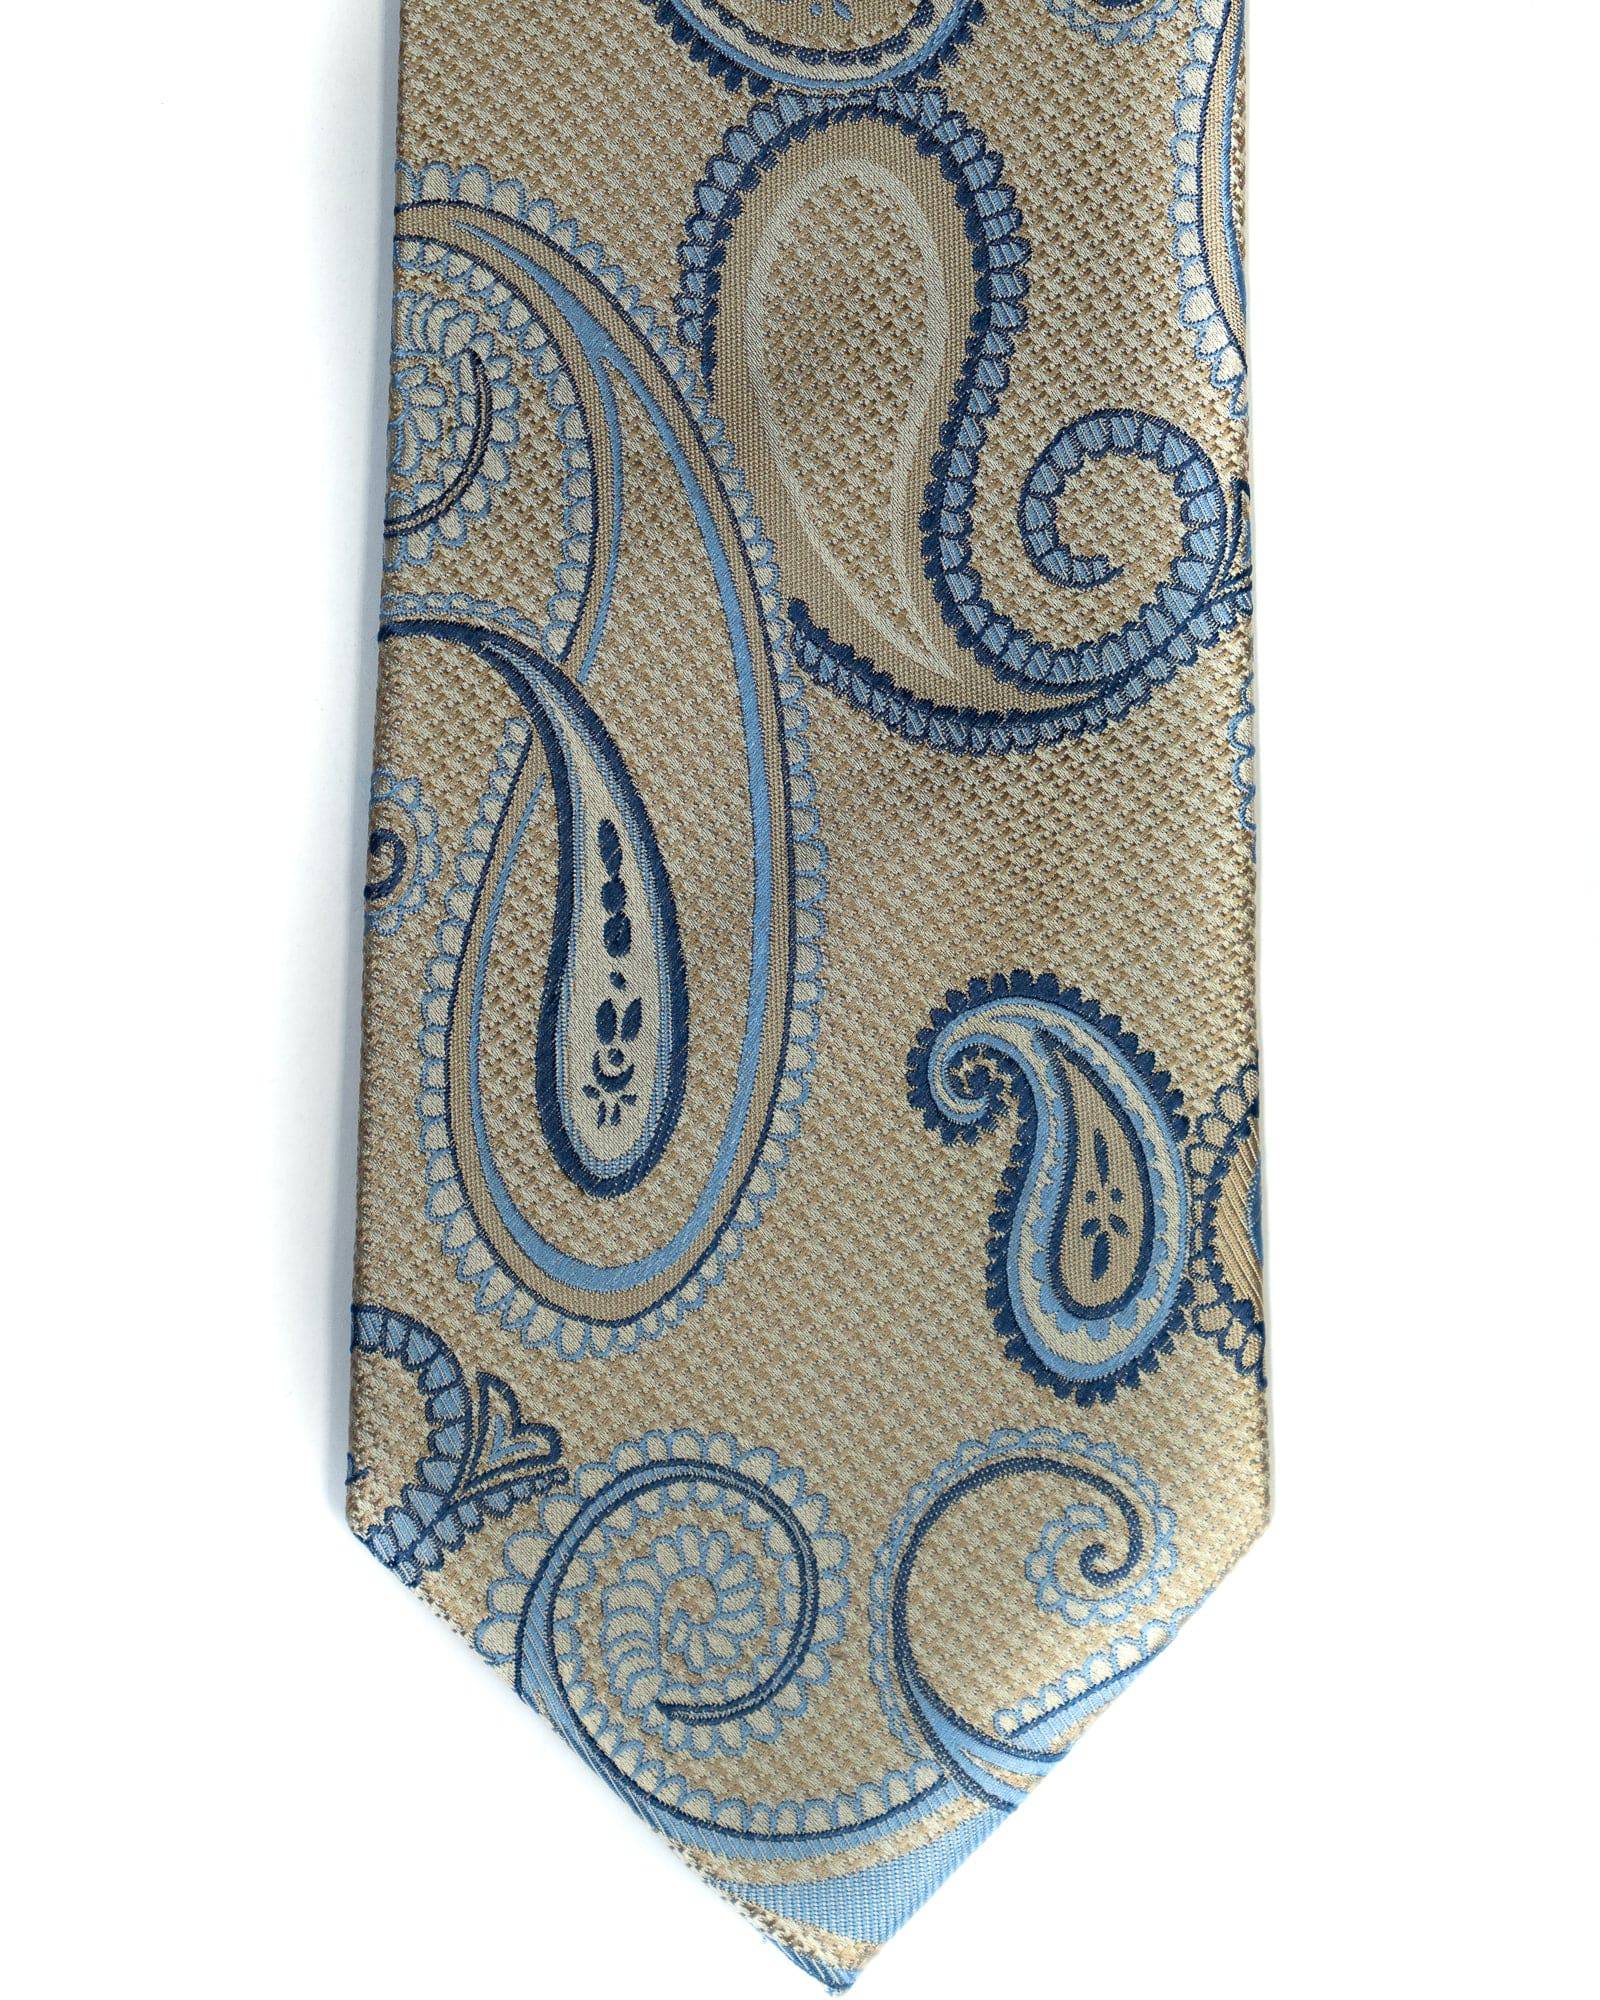 Paisley Silk Tie in Tan With Navy - Rainwater's Men's Clothing and Tuxedo Rental